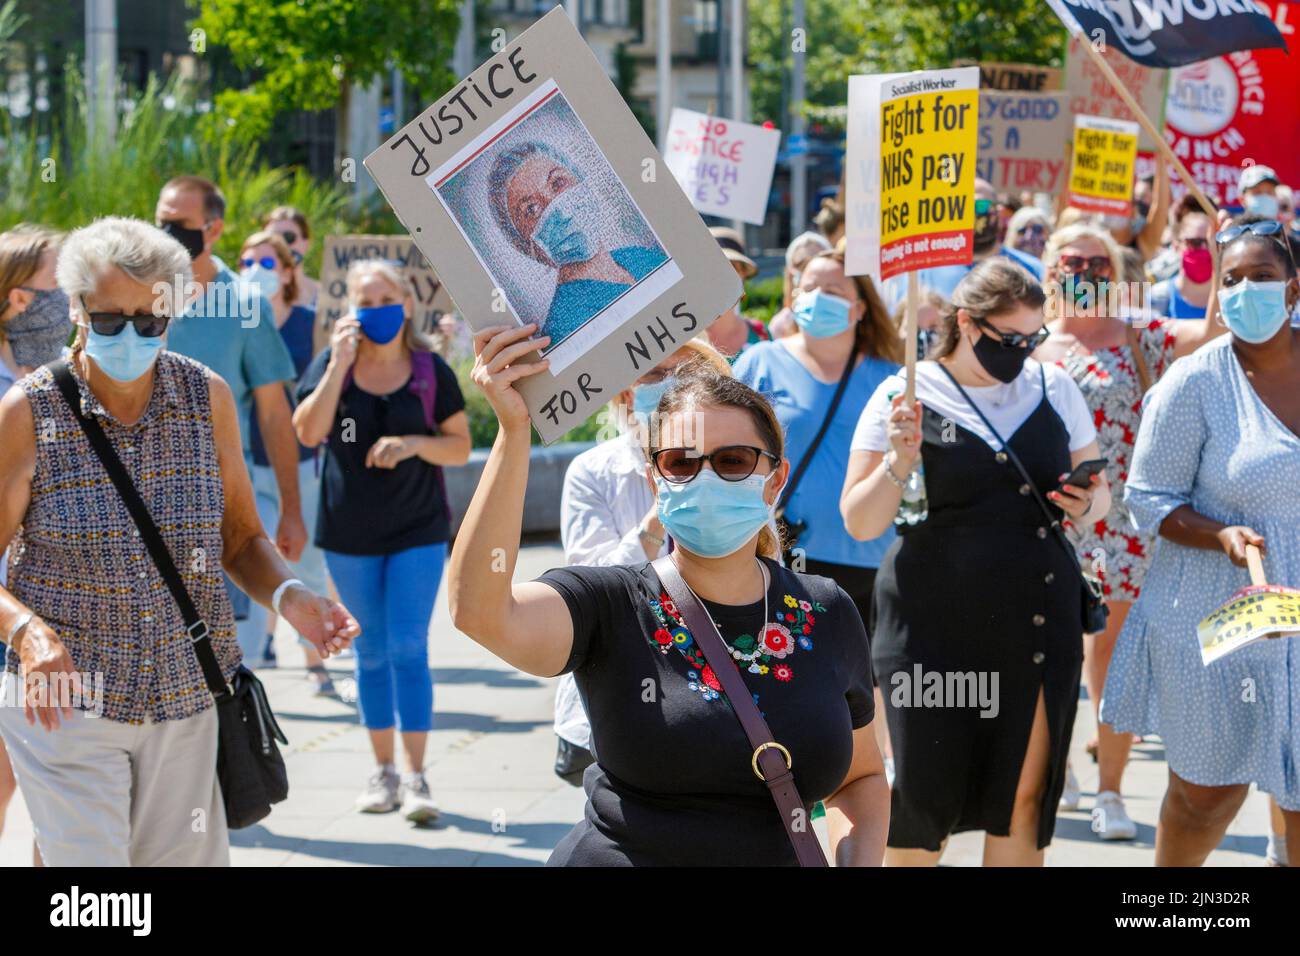 Placard carrying protesters are pictured as they take part in an NHS workers ‘pay justice’ demonstration and protest march in Bristol, 8th August 2020 Stock Photo